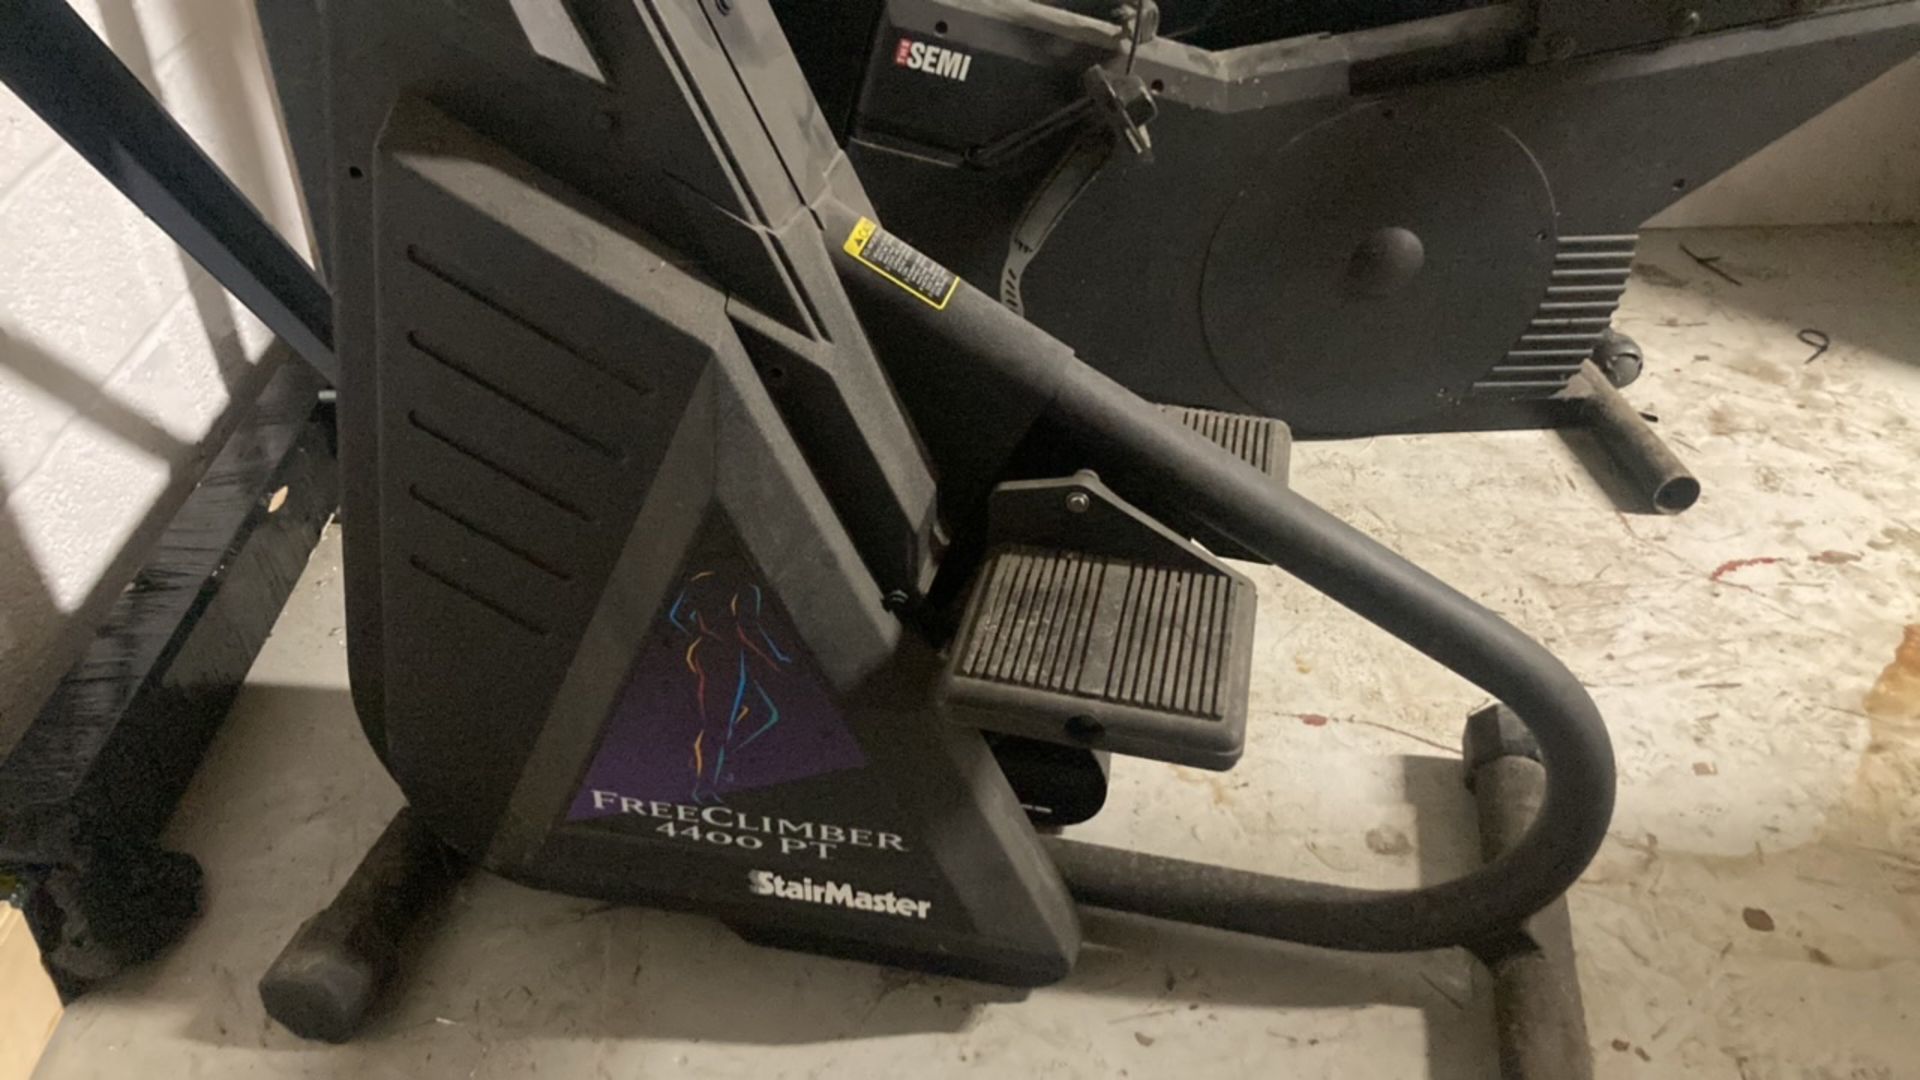 StairMaster - Image 3 of 3